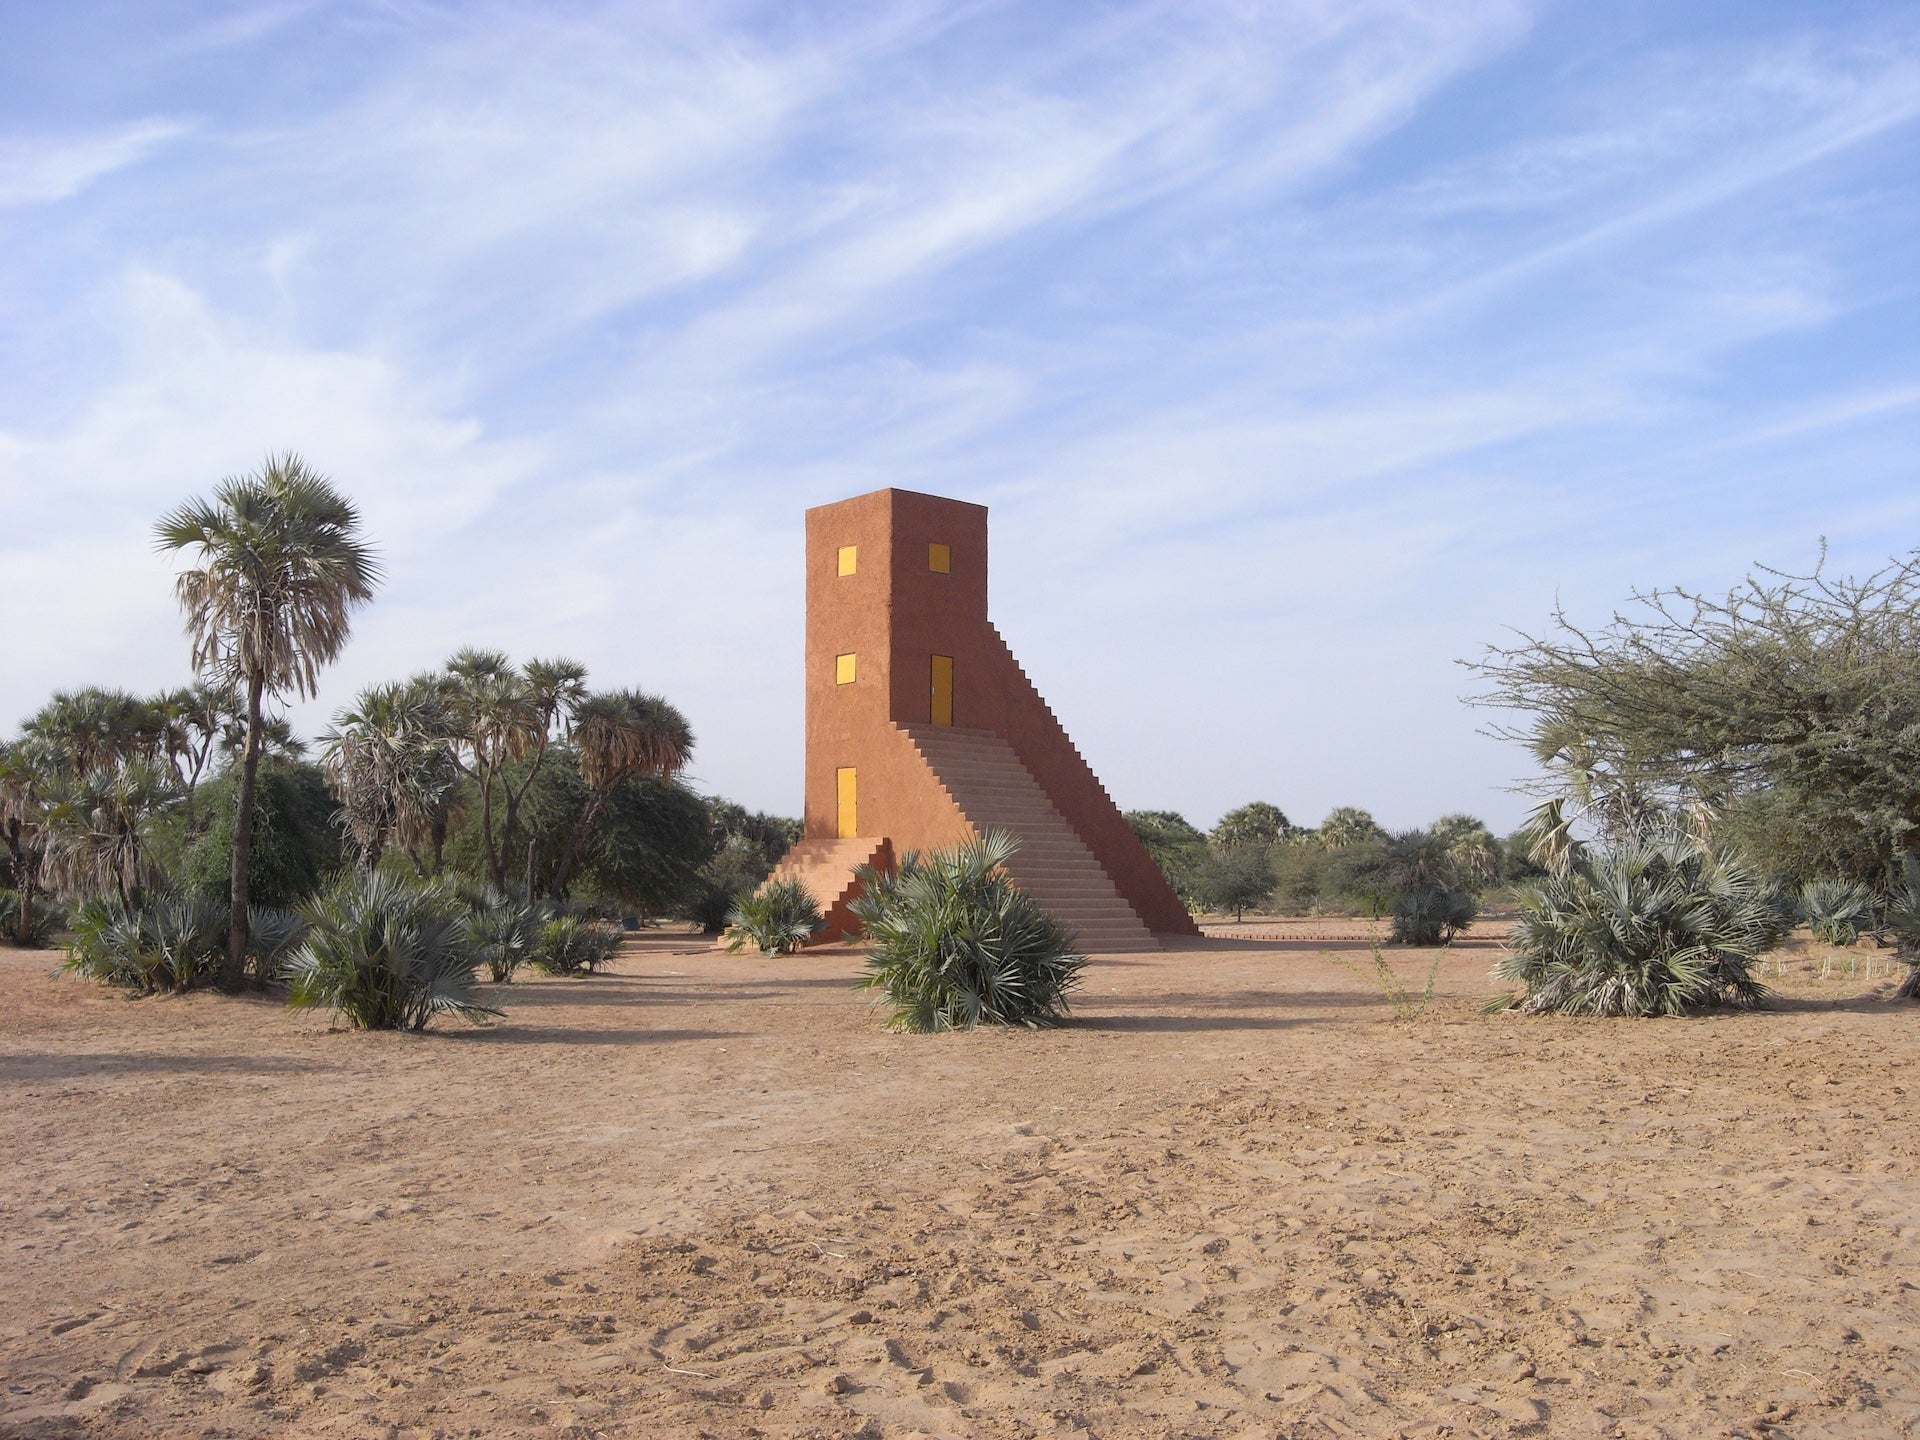 House to Watch the Sunset by Not Vital, 2005, Aladab, Niger. Photo © Not Vital